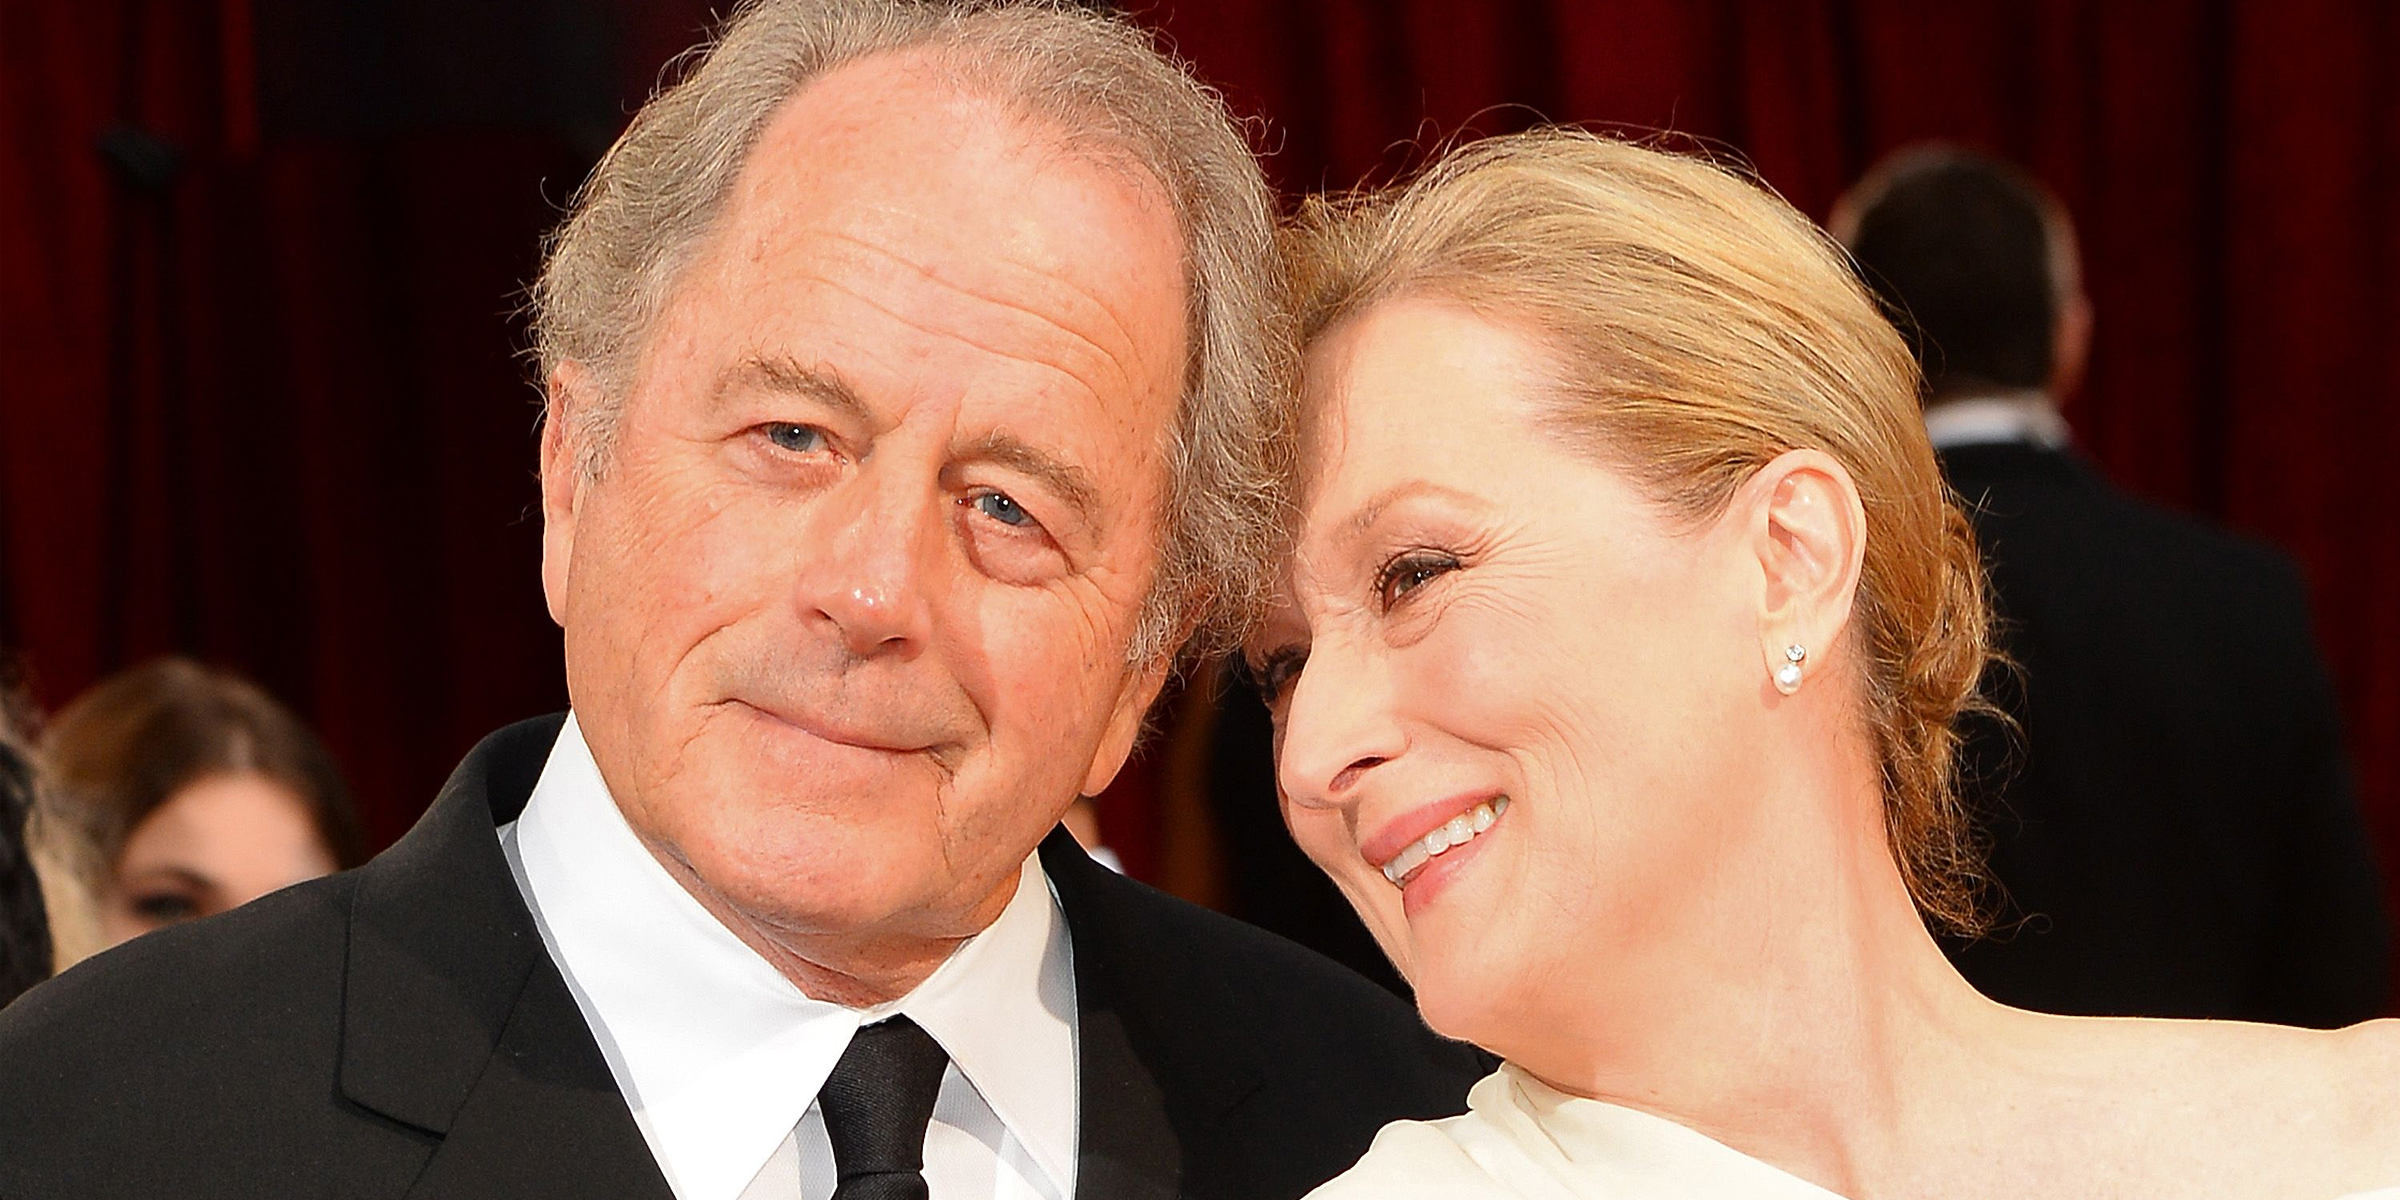 Meryl Streep and Don Gummer | Source: Getty Images